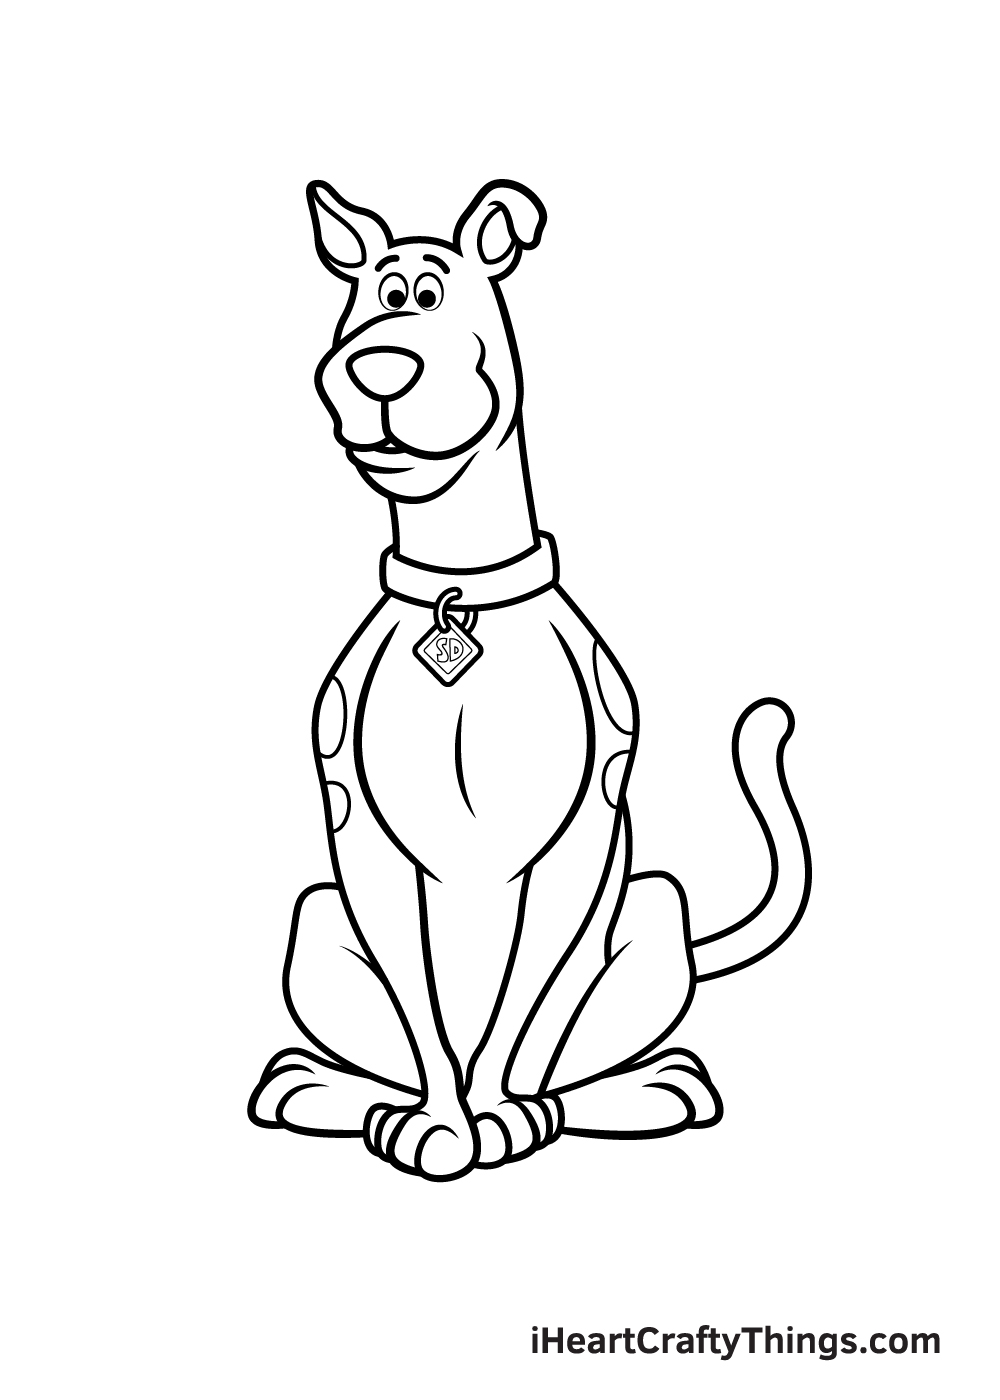 drawing Scooby-Doo step 9